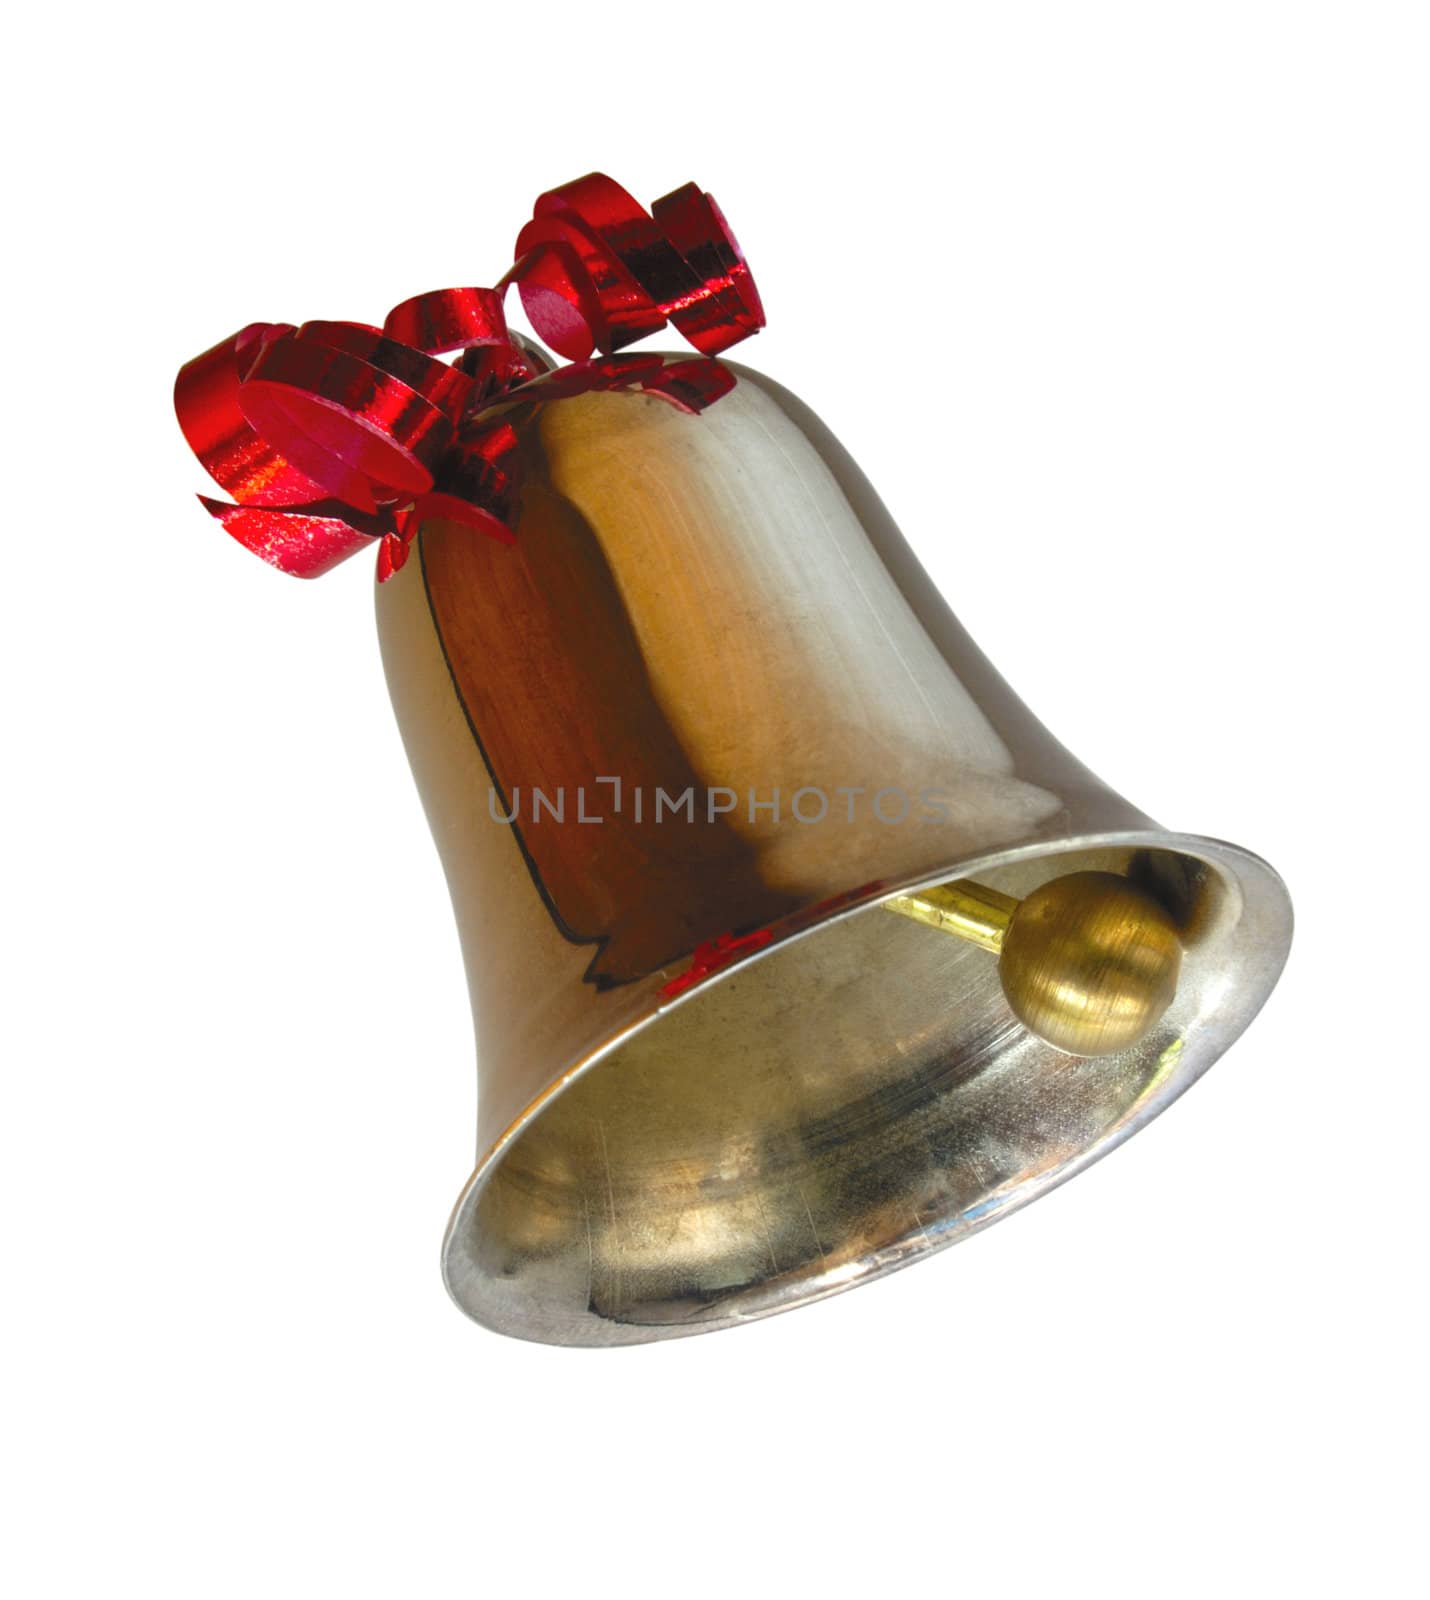 A ringing bell, decorated with a red ribbon. With cliping path.